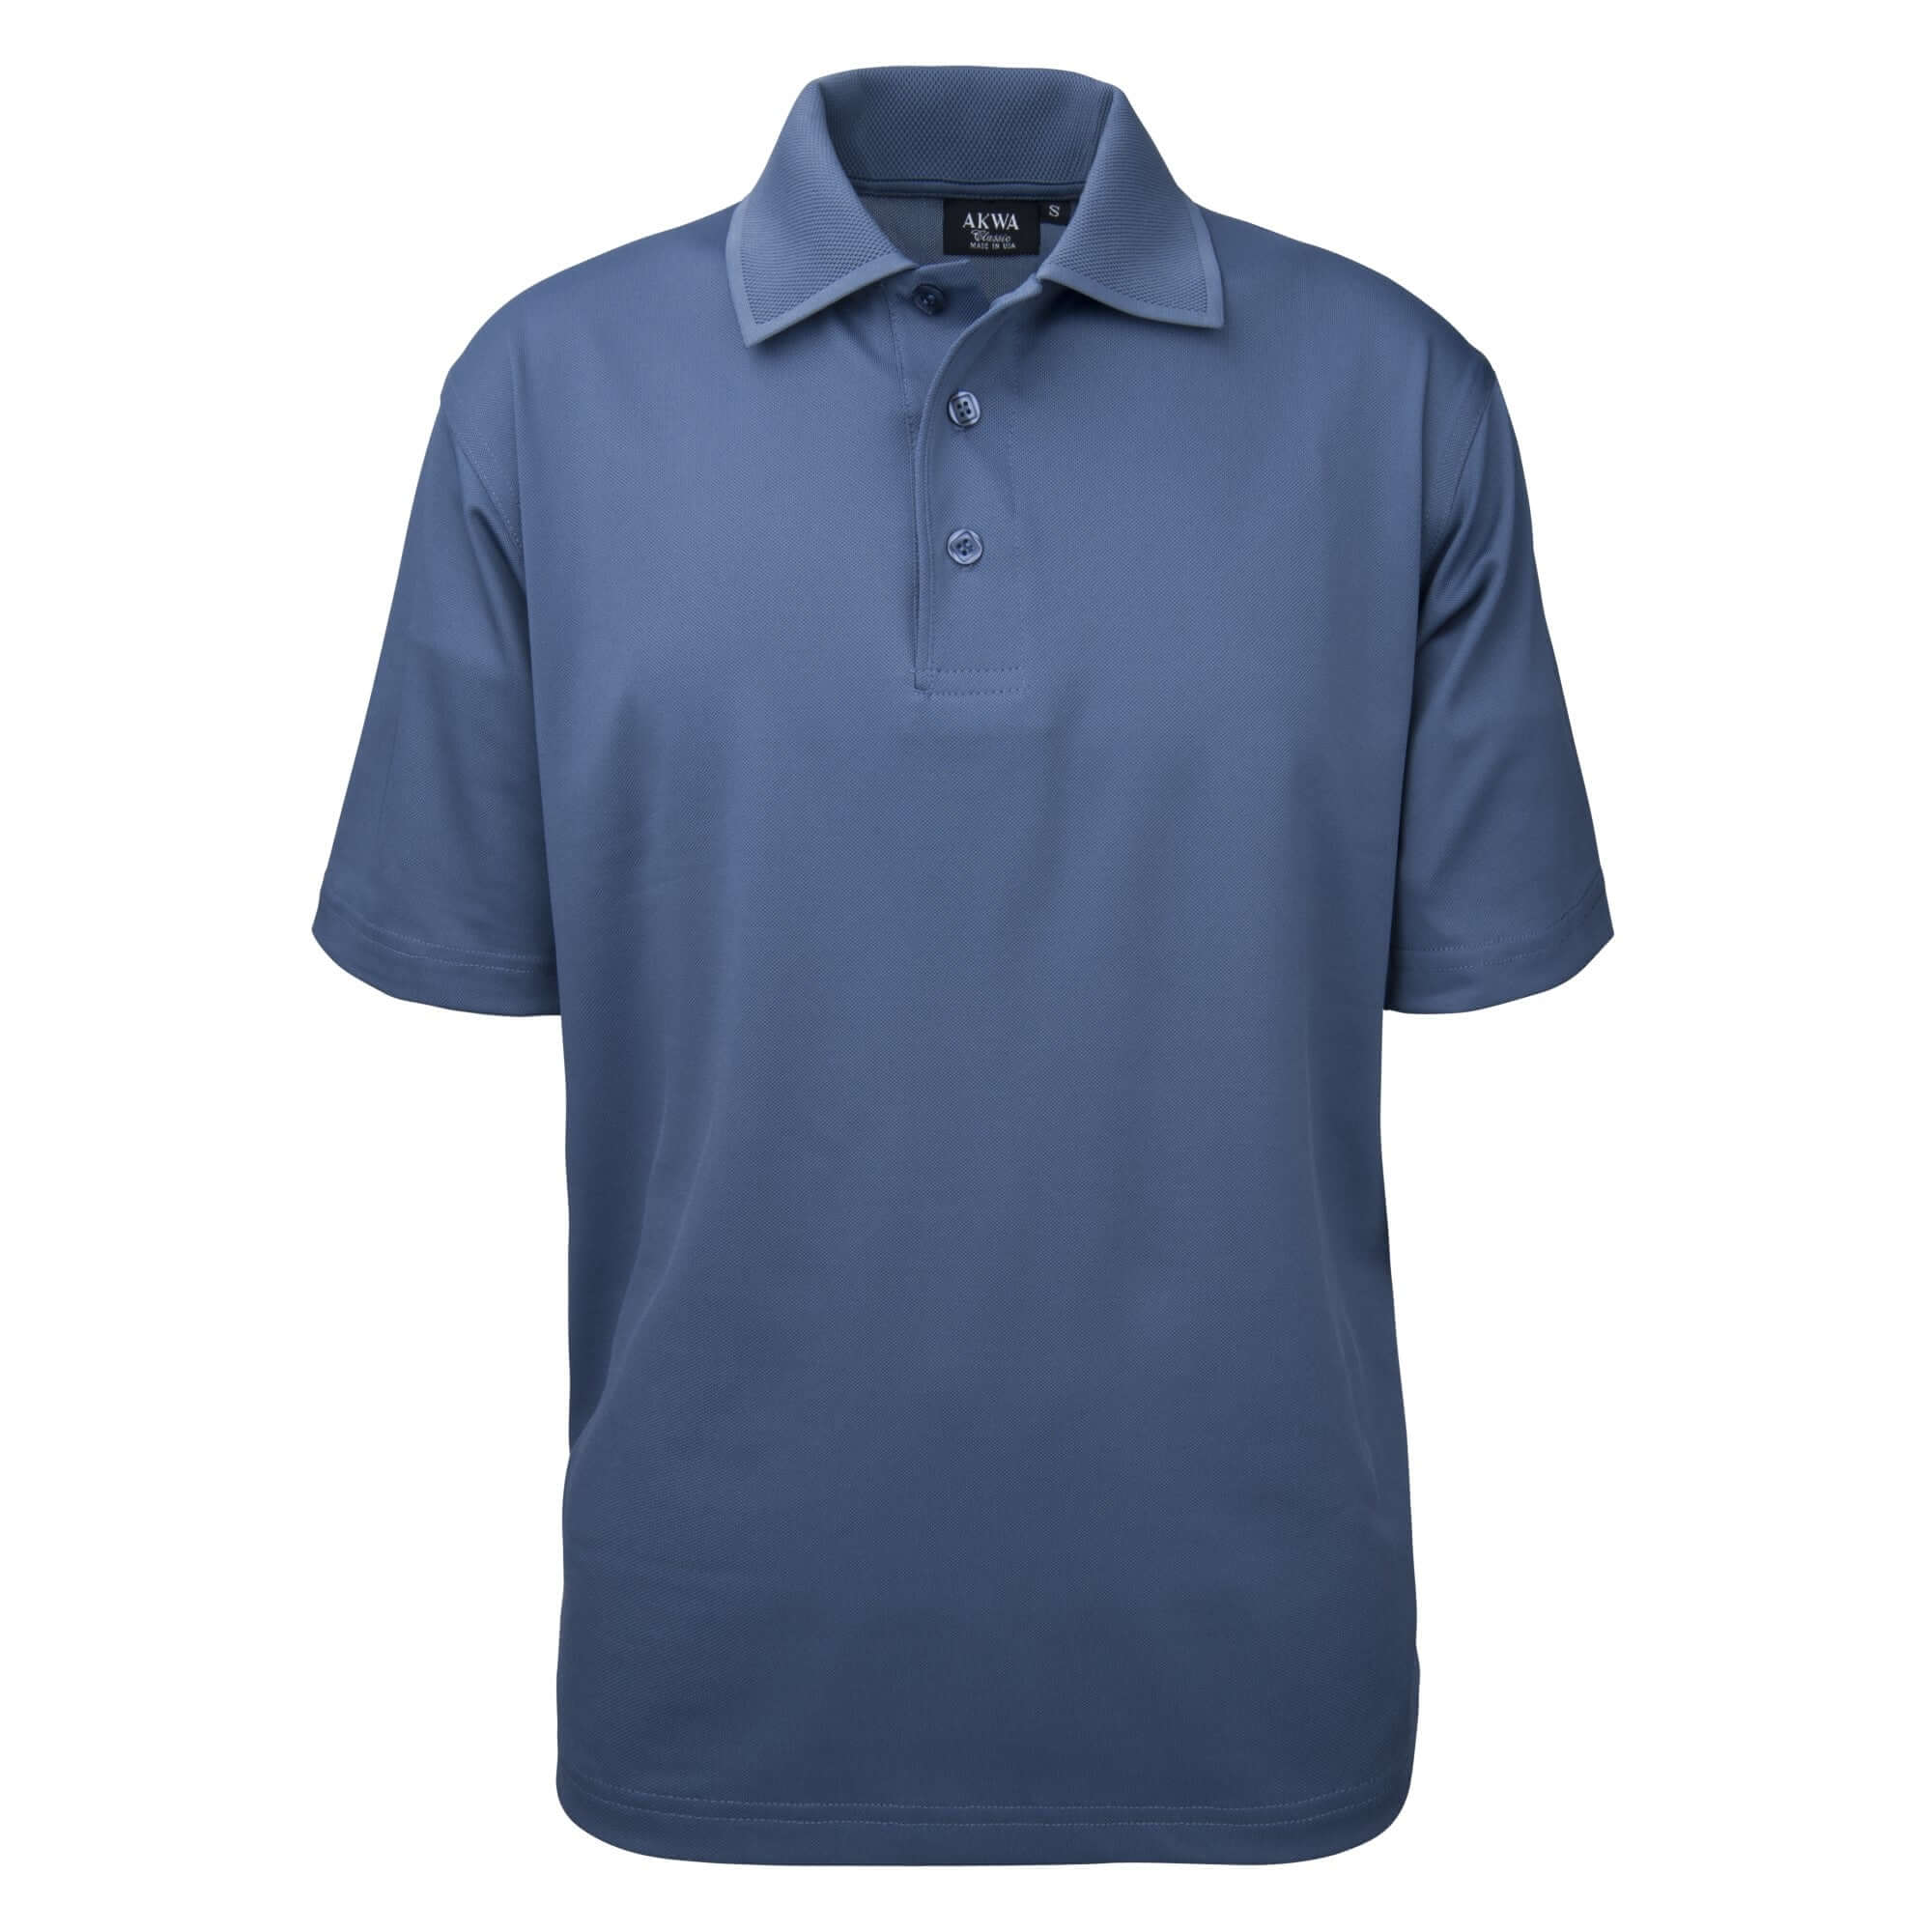 Men's Made in USA Tech Polo Shirt color_steel_blue - the flag shirt